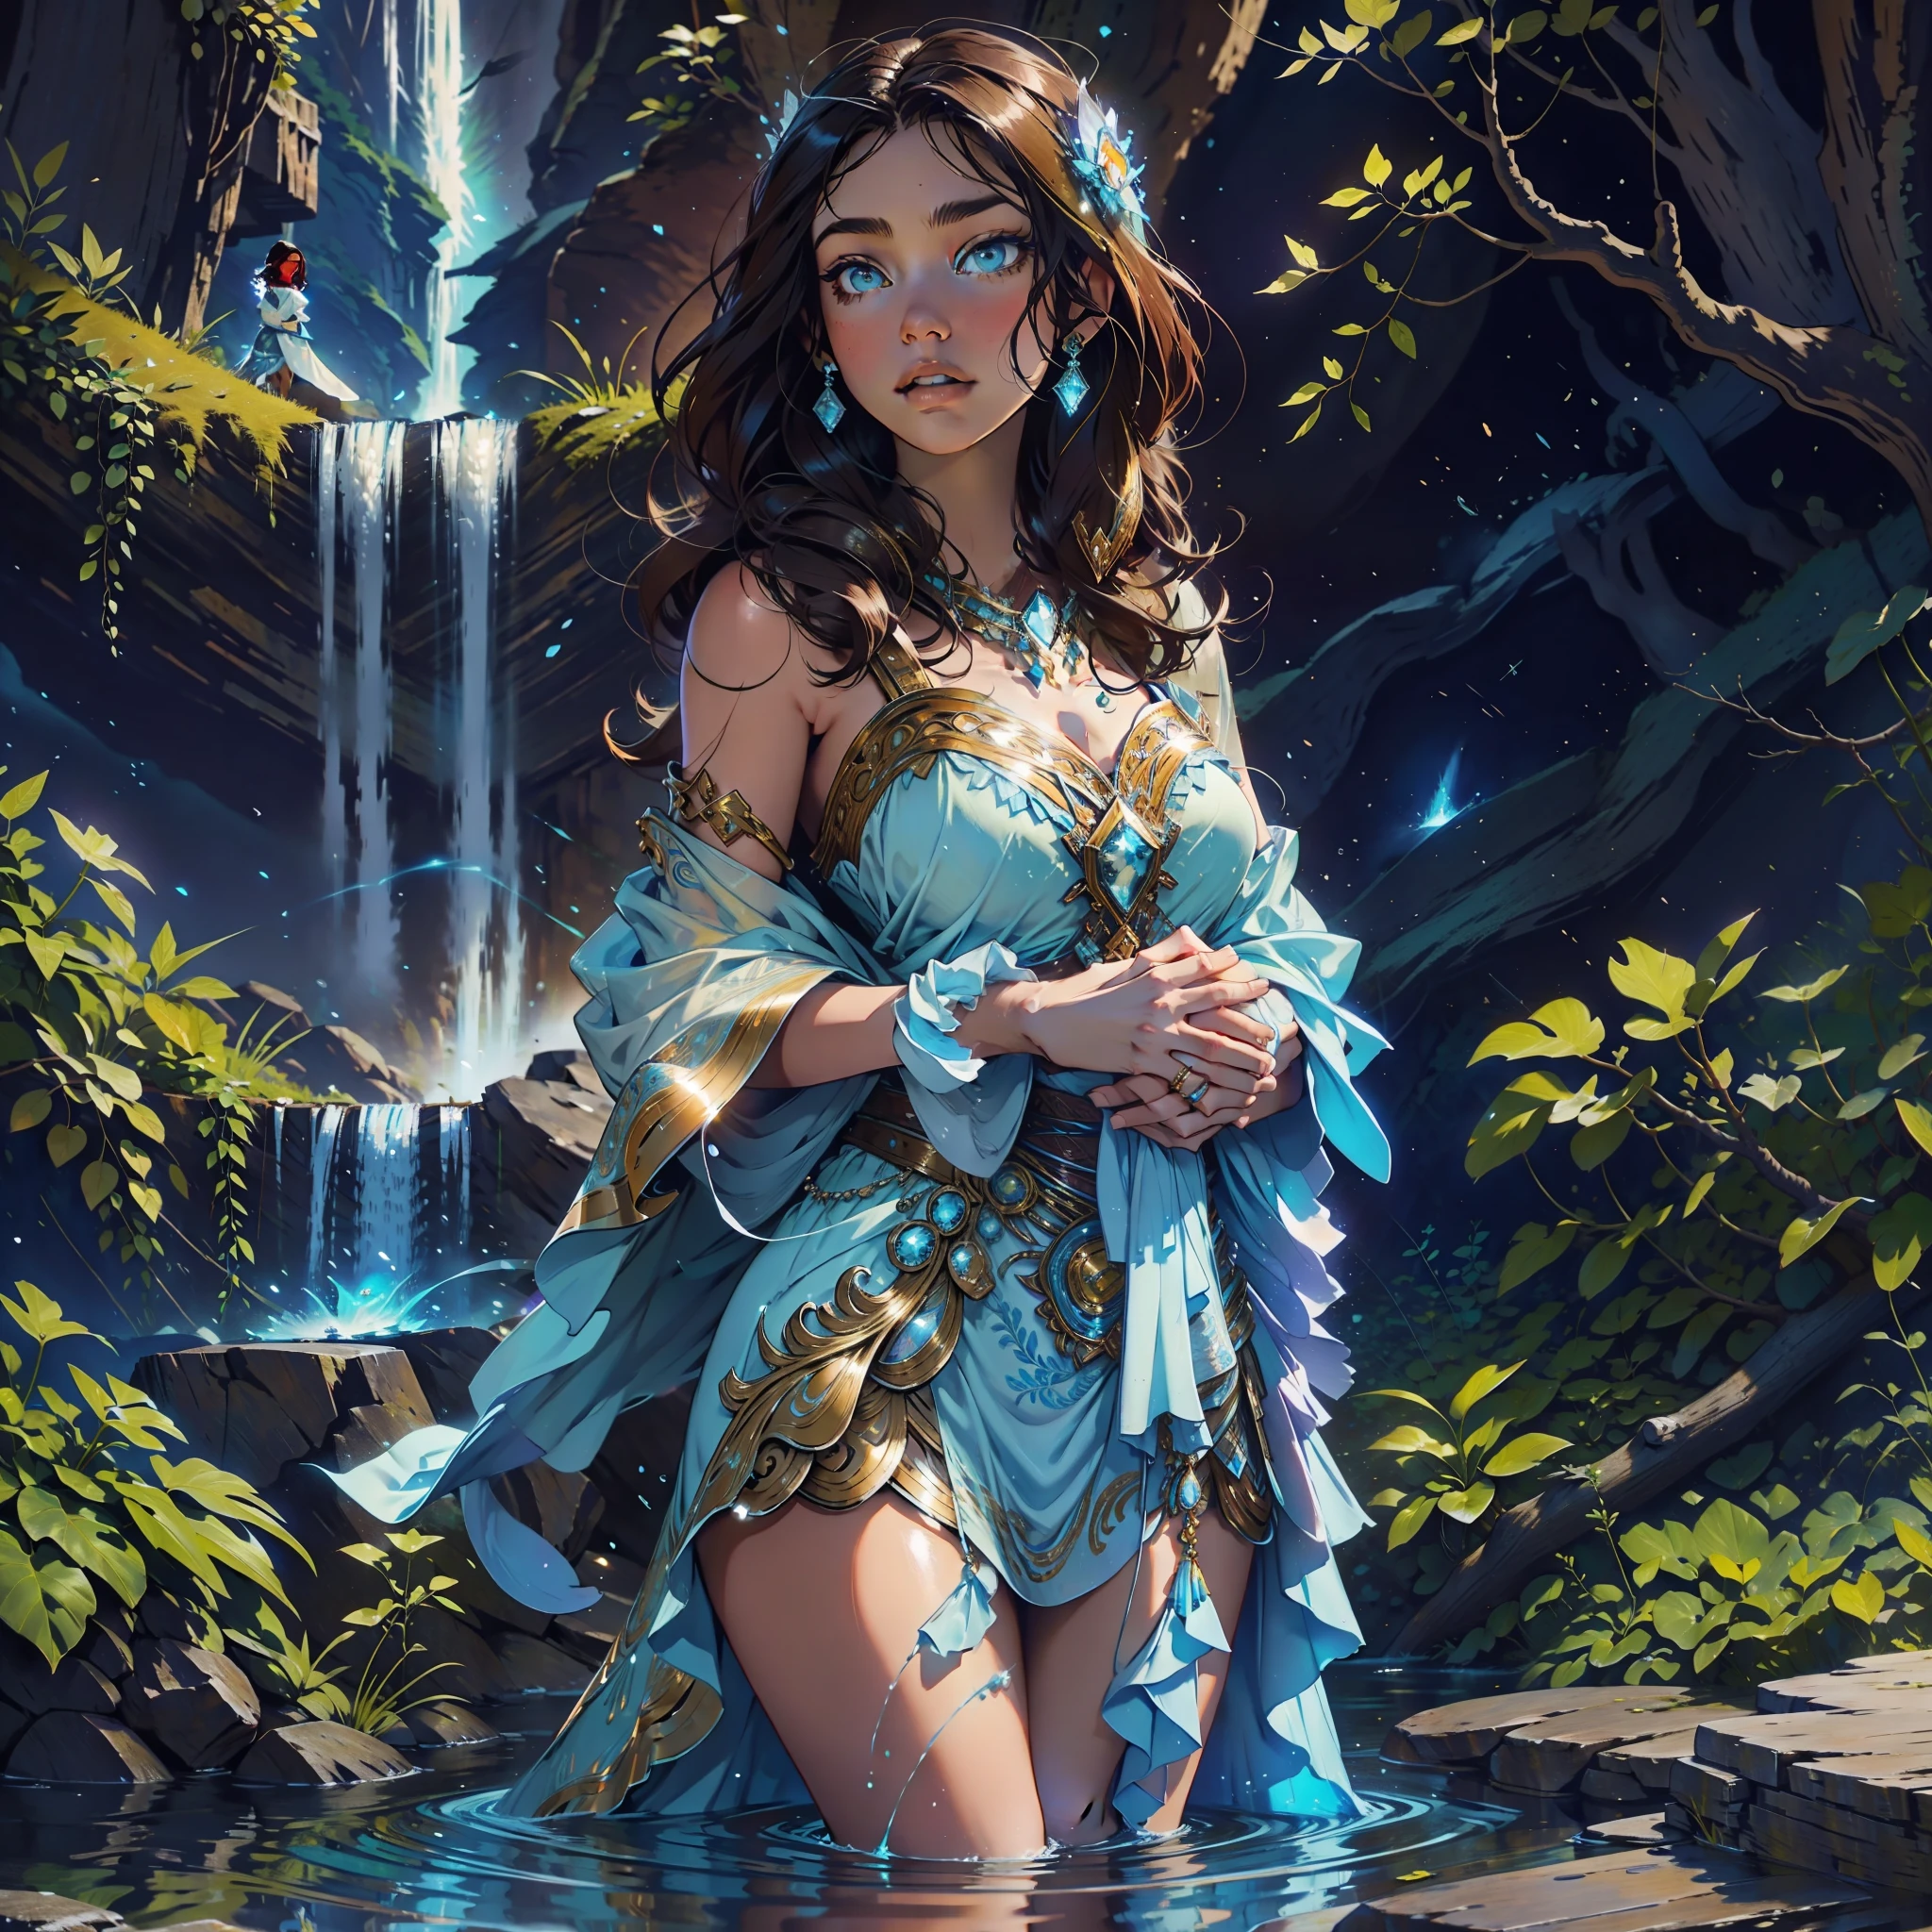 A brunette woman is standing at a majestic waterfall that glows a soft blue hue as it falls down the body of the woman who feels peace in that place